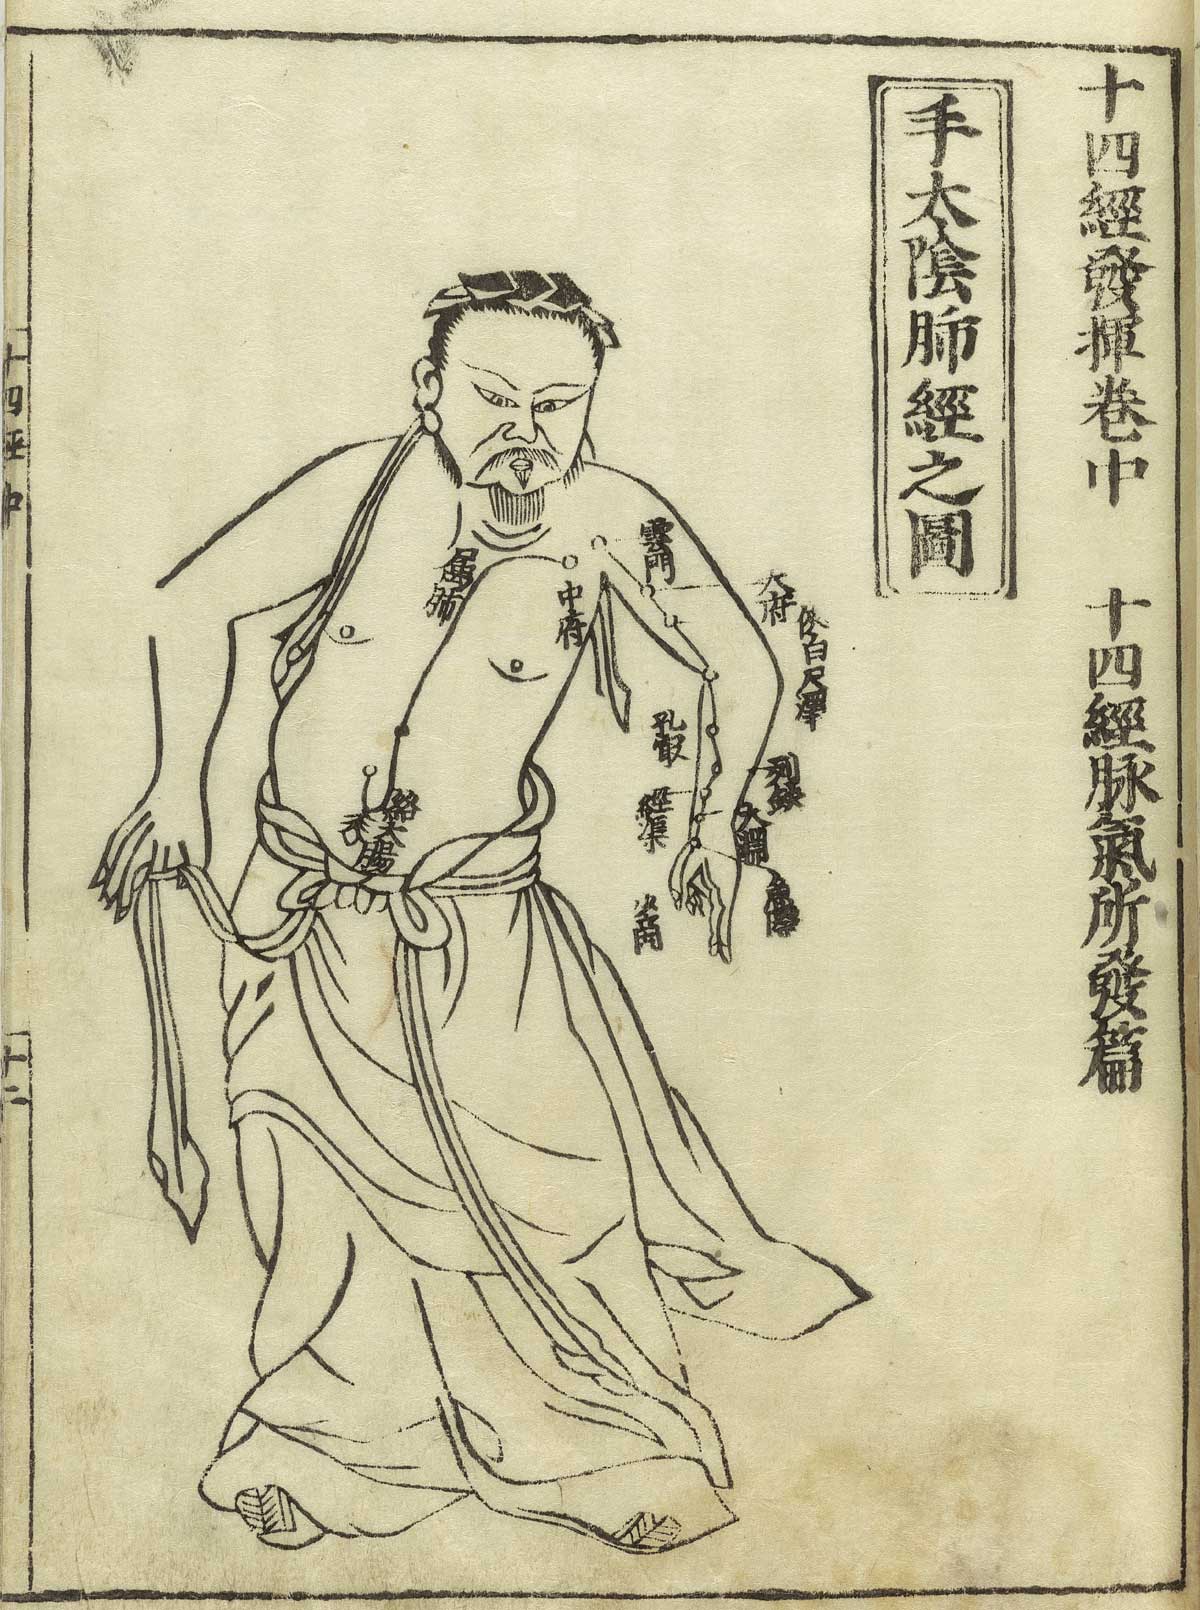 Woodcut of a standing male facing figure wearing a skirt with meridians indicated down the left arm and chest with Chinese characters giving names of the points and to the right giving the title of the image, from Hua Shou’s Jushikei hakki, NLM Call no.: WZ 260 H868s 1716.